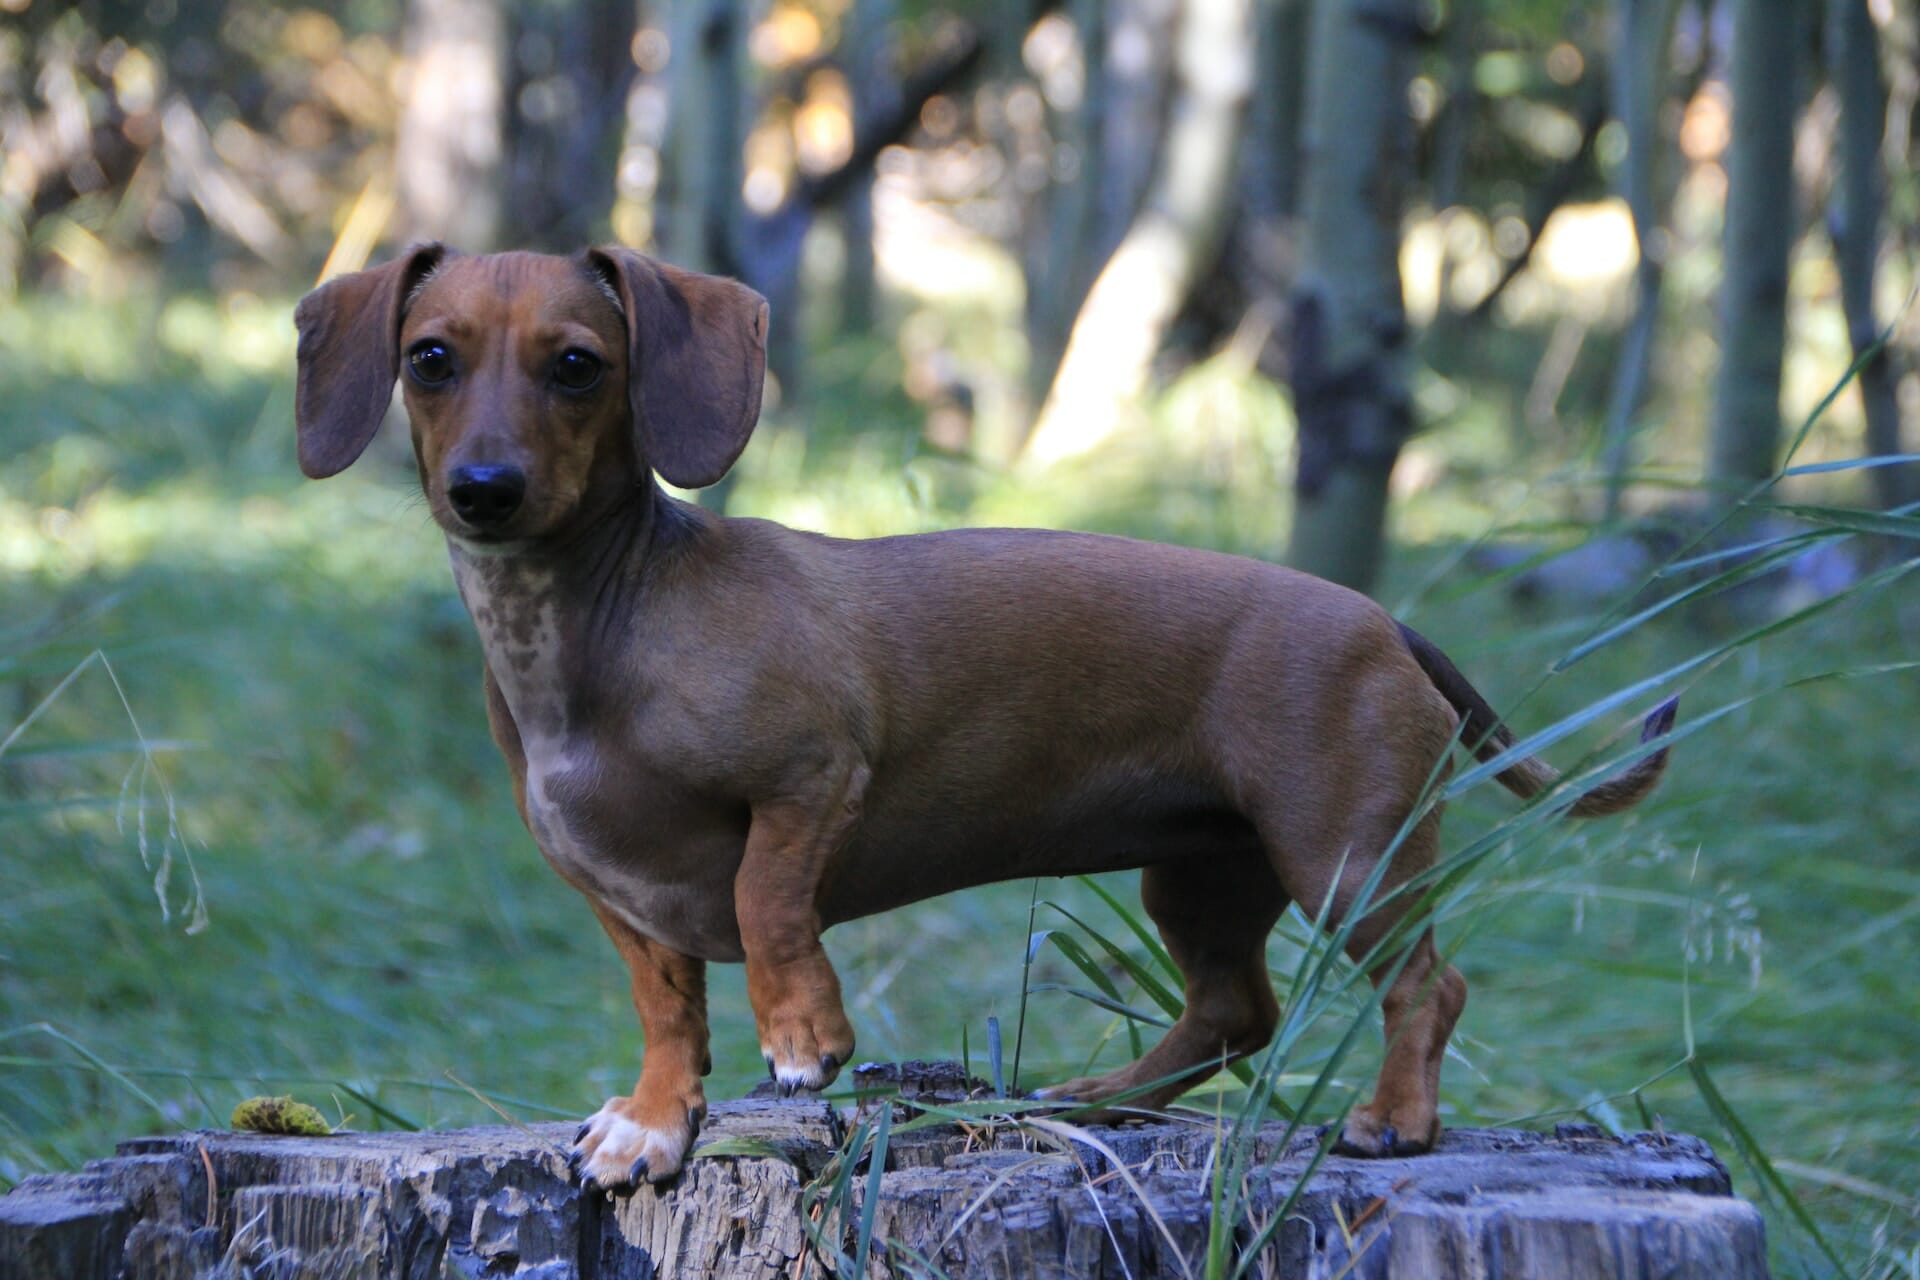 50 Best Dachshund Dog Quotes That Inspire Joy and Positivity